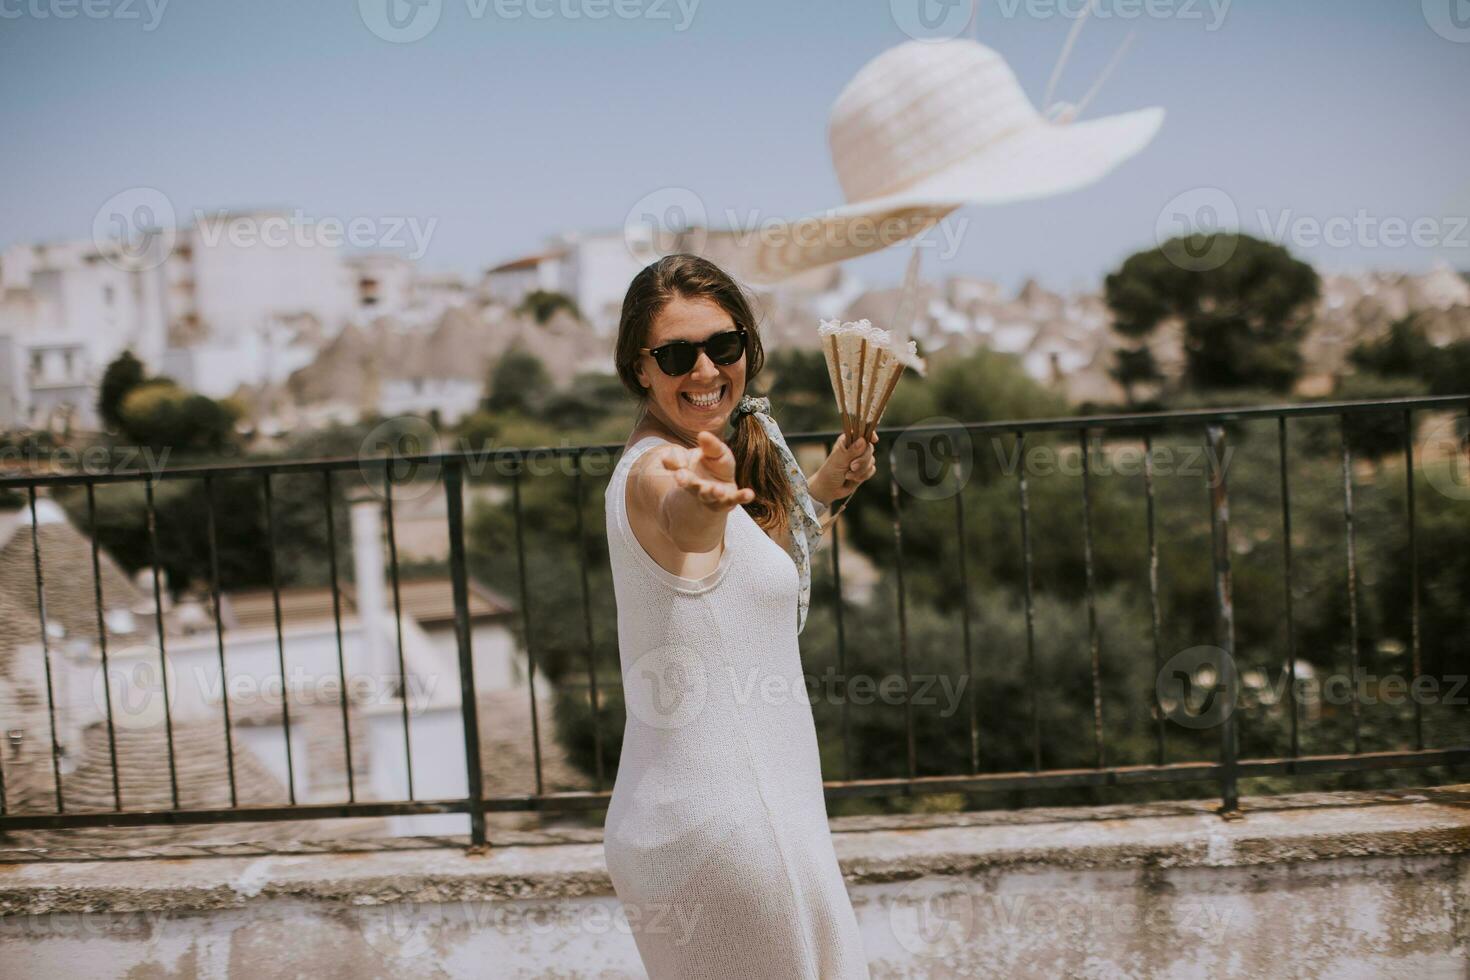 A young woman in a white dress throw hat during tourist visit in Alborebello, Italy photo